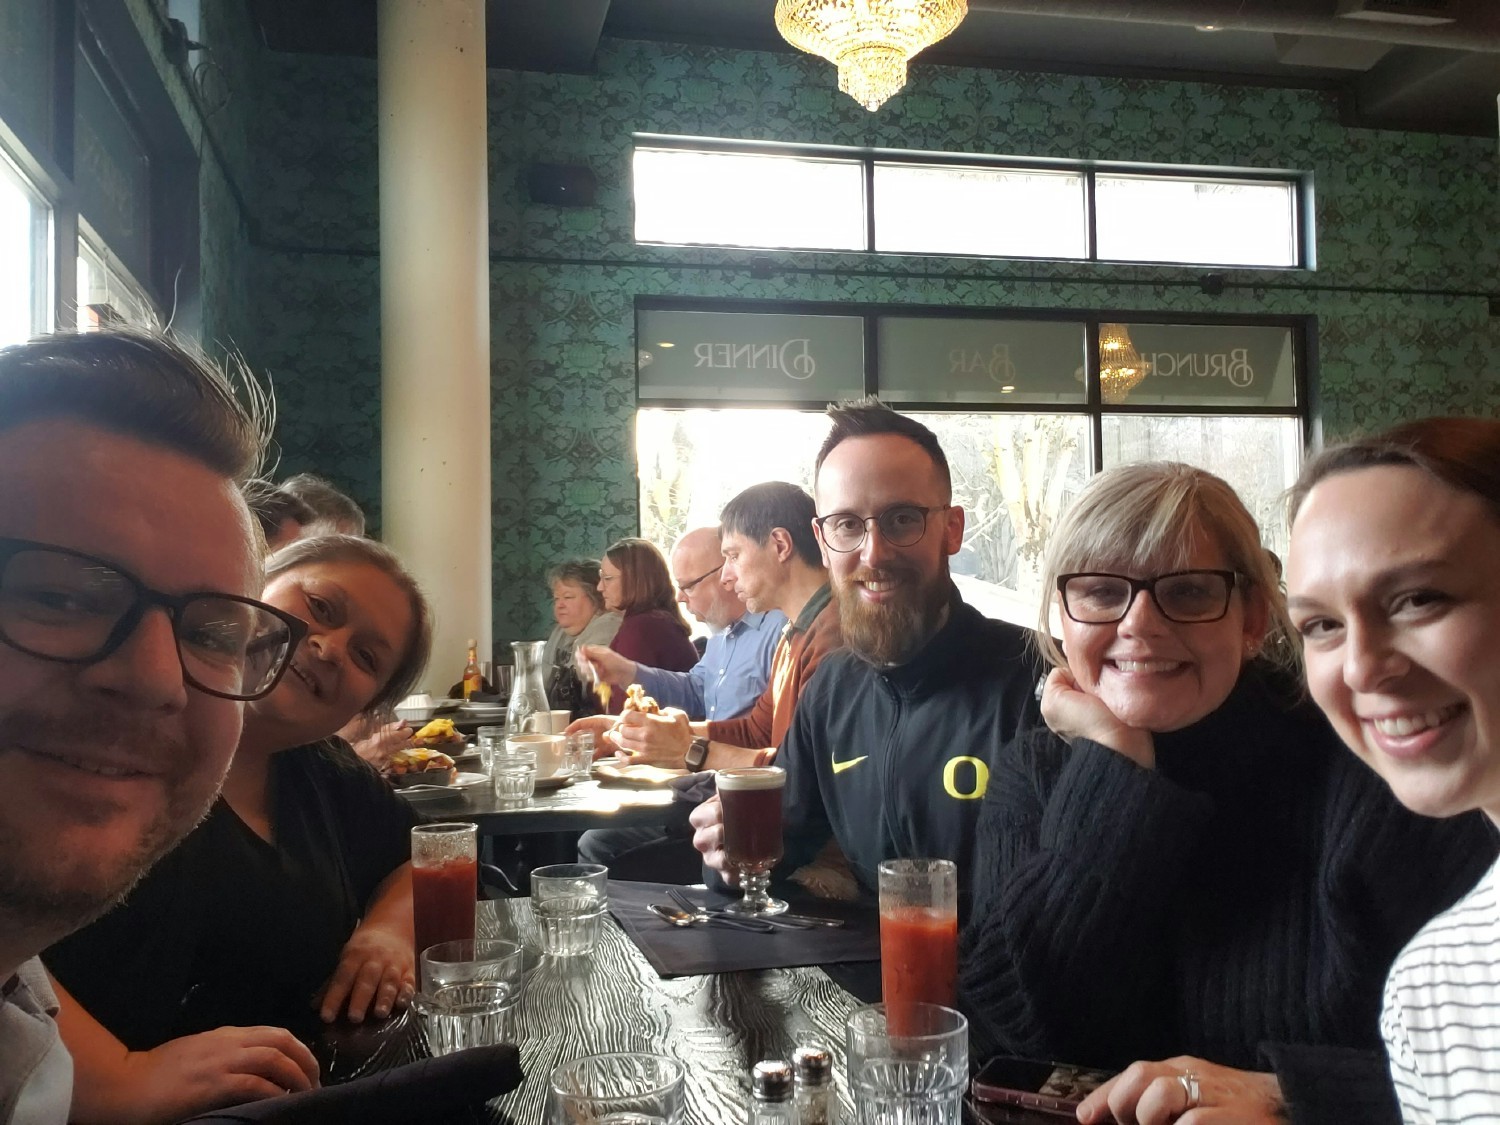 Project Management and Operations bond over dinner at a locally owned eatery near our Eugene, OR headquarters.